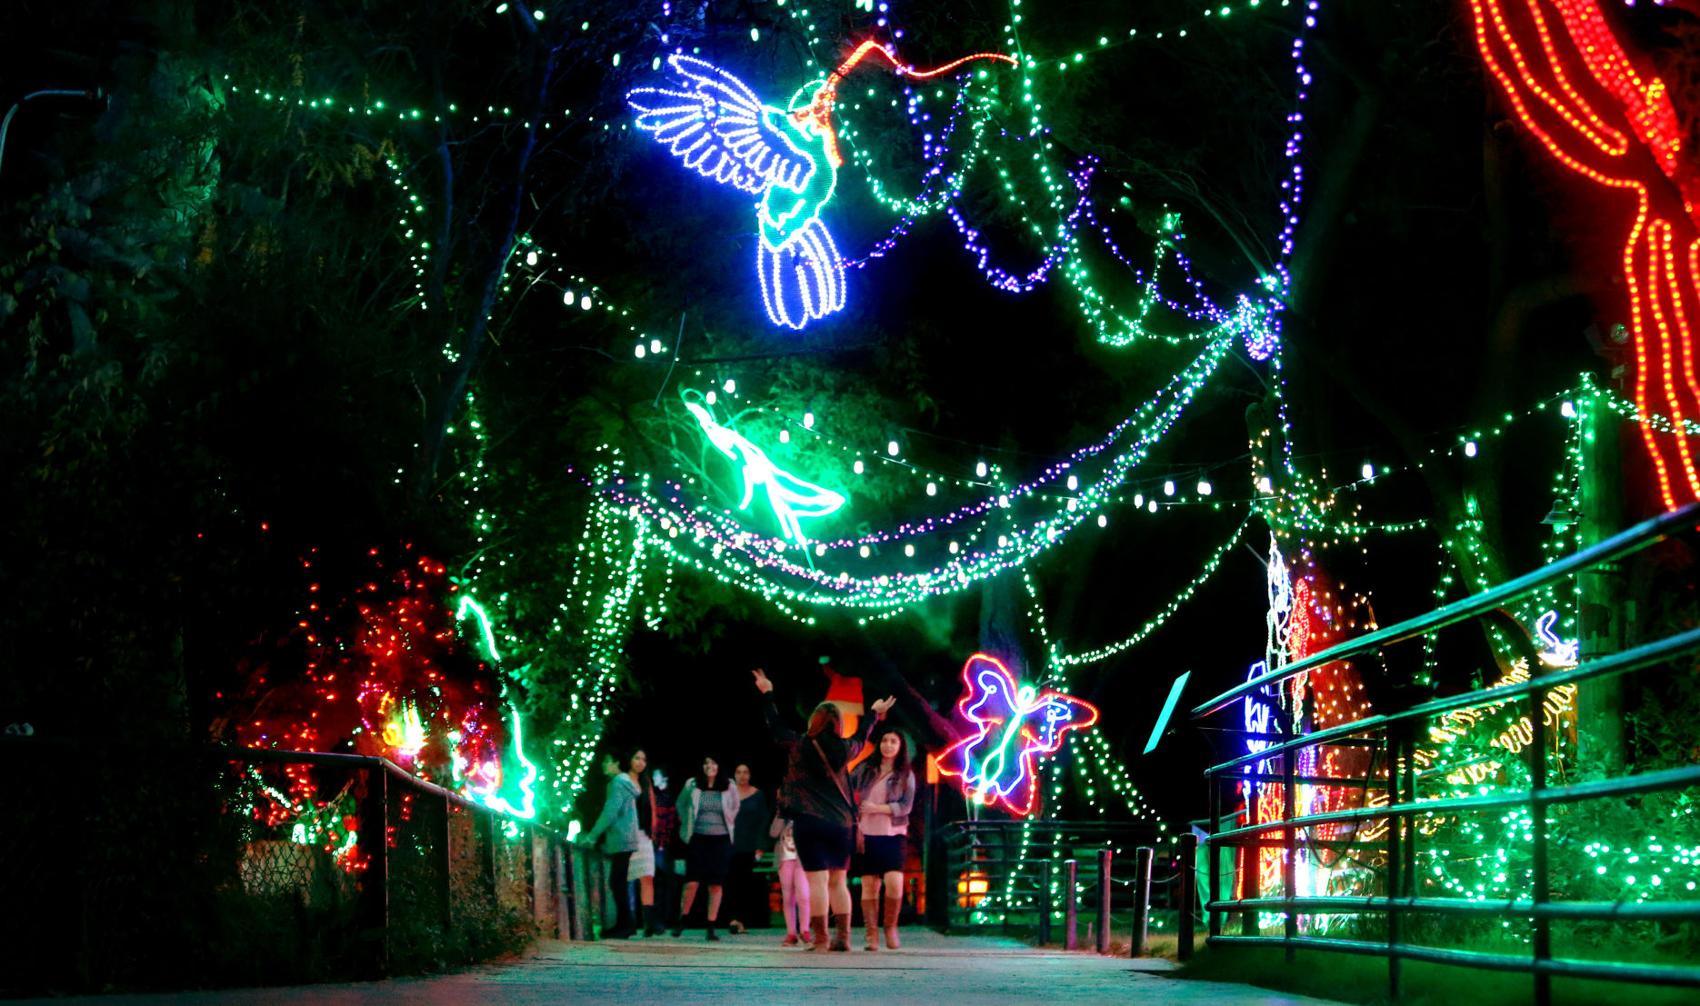 28 Tucson holiday festivals, events and markets to check out this season